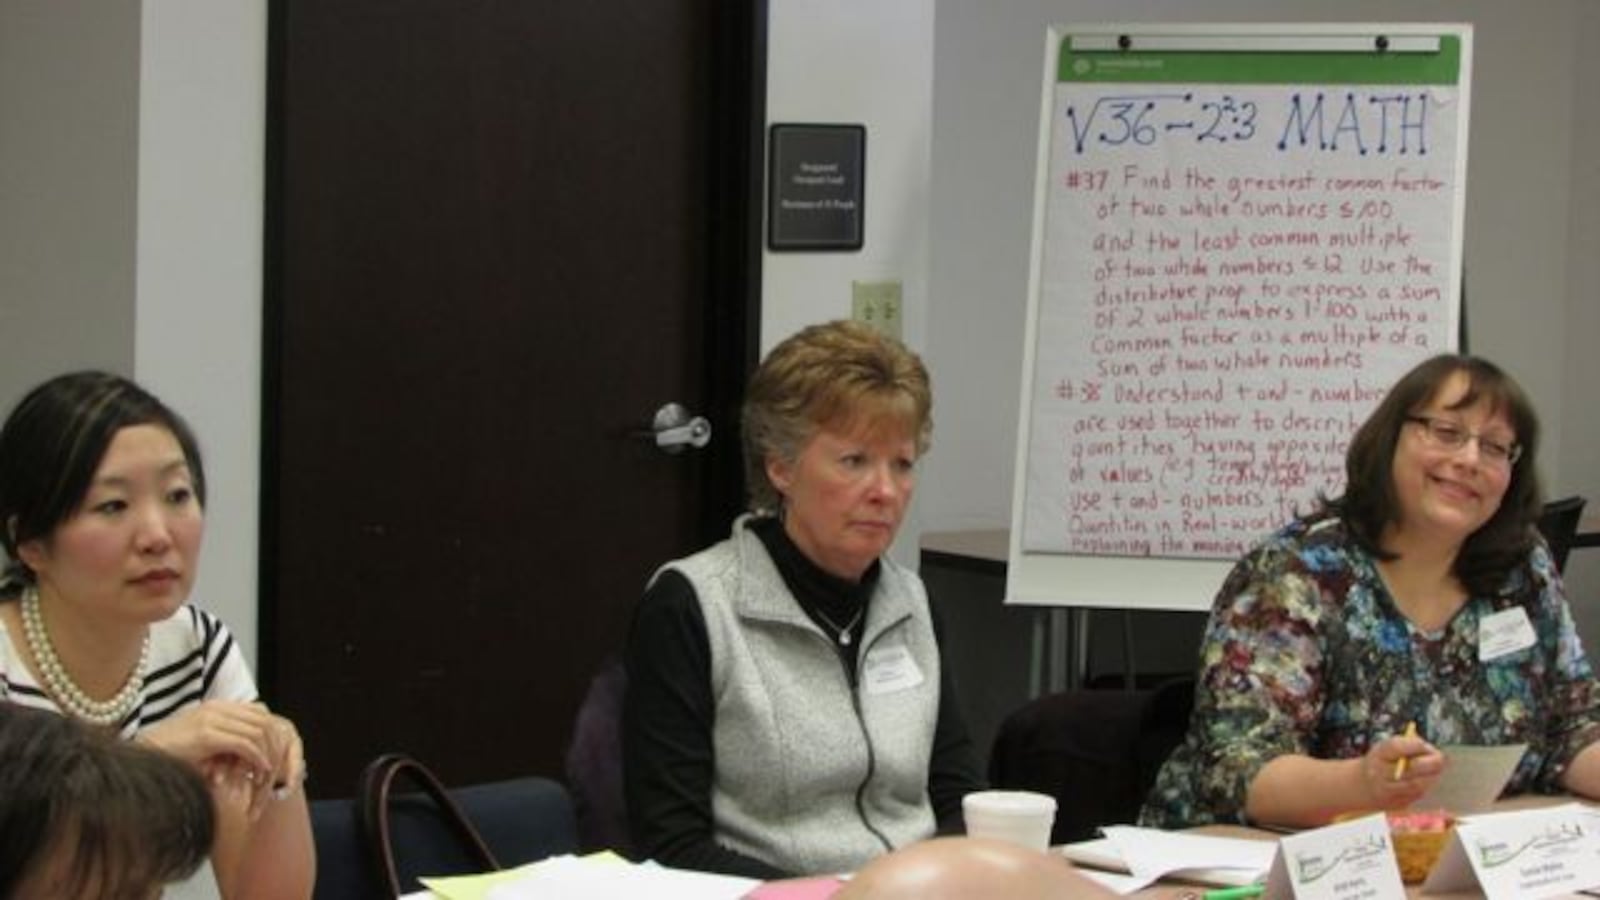 Members of a committee work on Indiana's new math standards at a meeting on Feb. 13. (Scott Elliott)